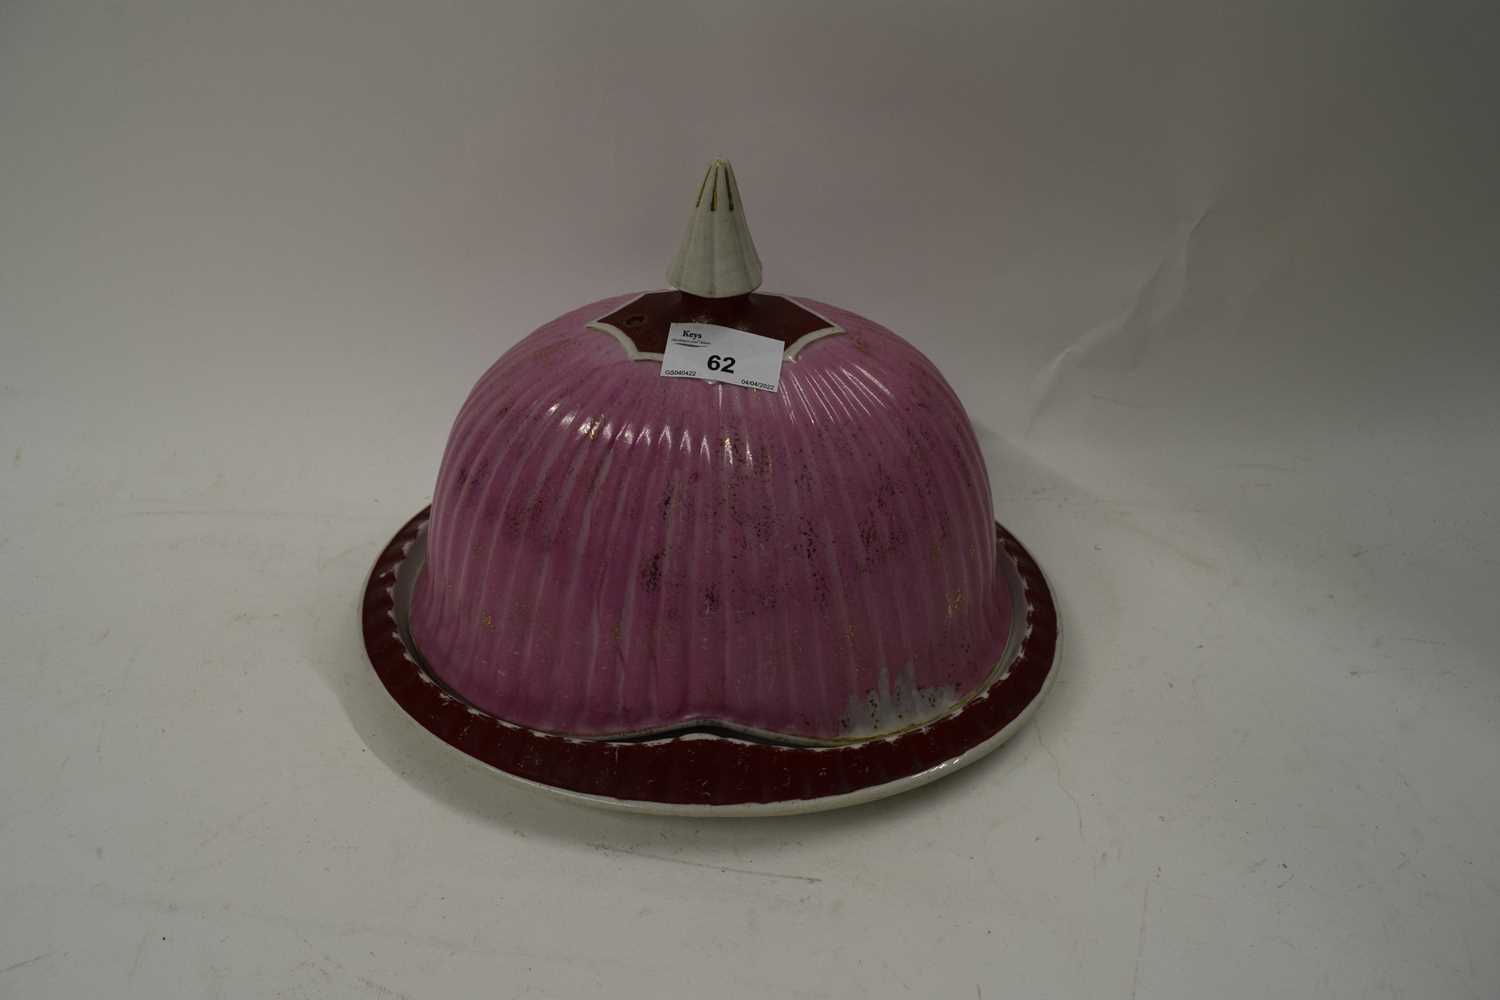 UNUSUAL GERMAN POTTERYCHEESE DISH FORMED AS A PICKELHAUBE